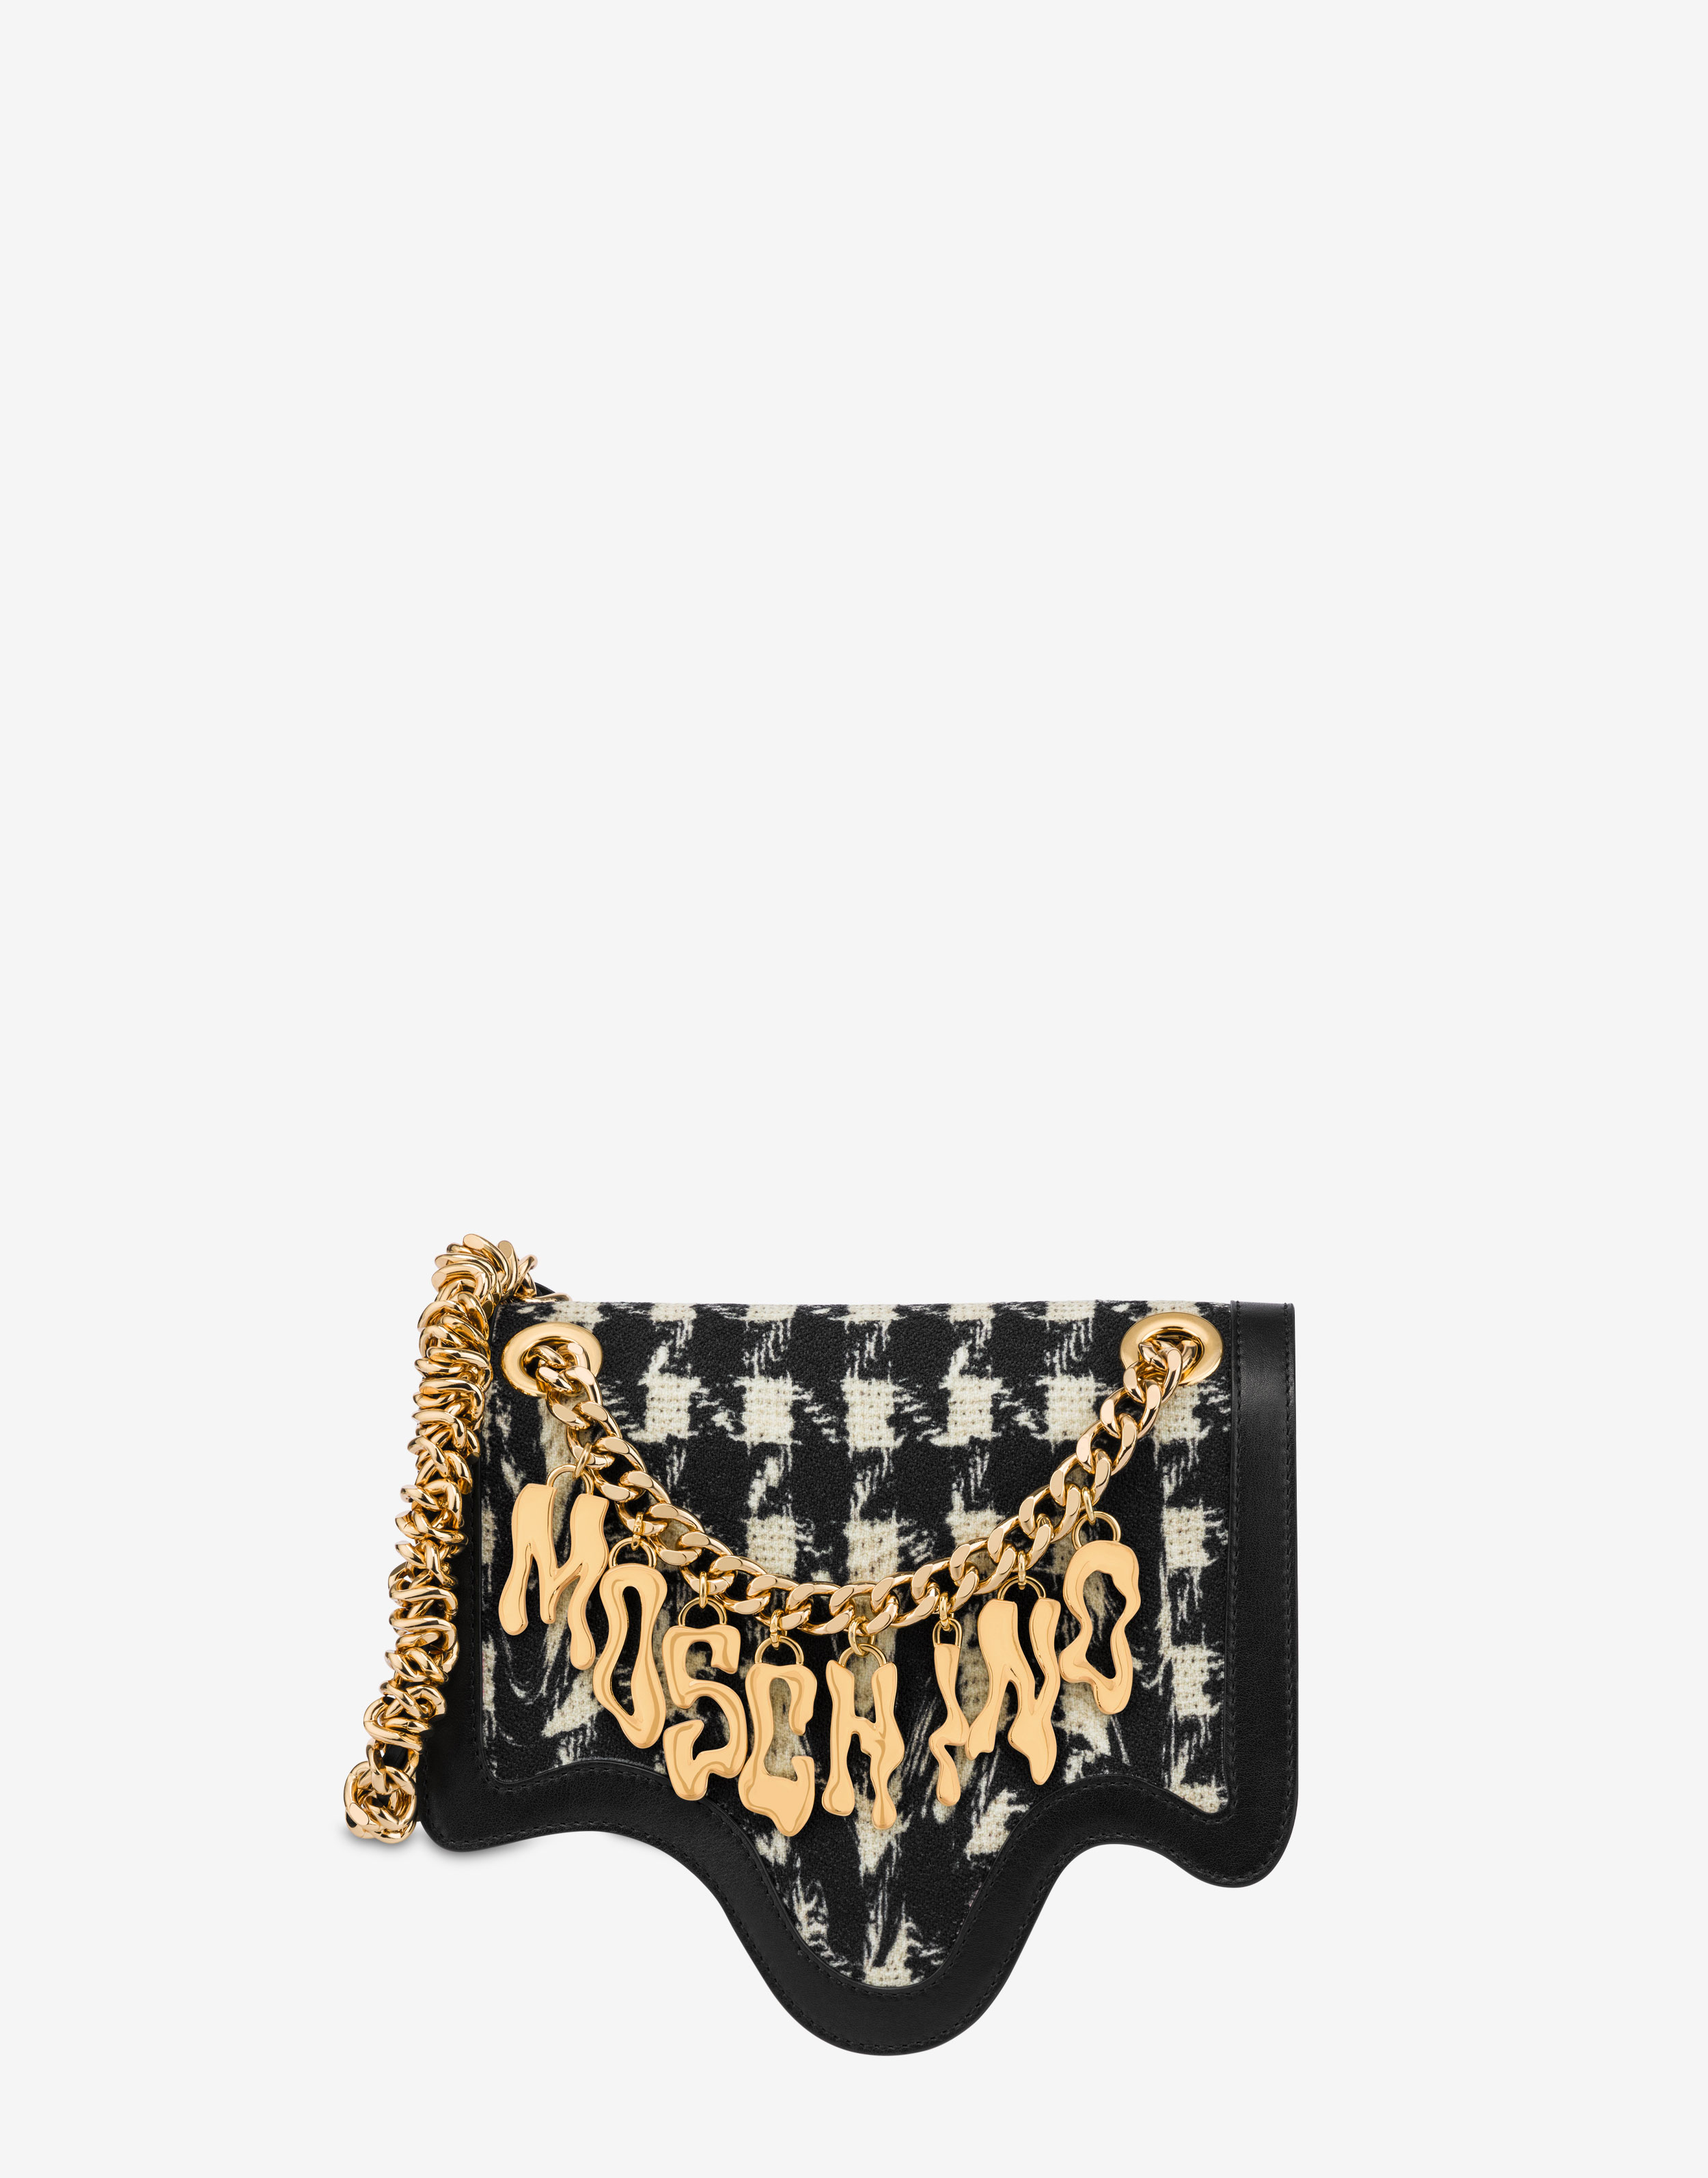 LOVE MOSCHINO Bow-detailed faux leather shoulder bag | Leather shoulder bag,  Moschino bag, Bags